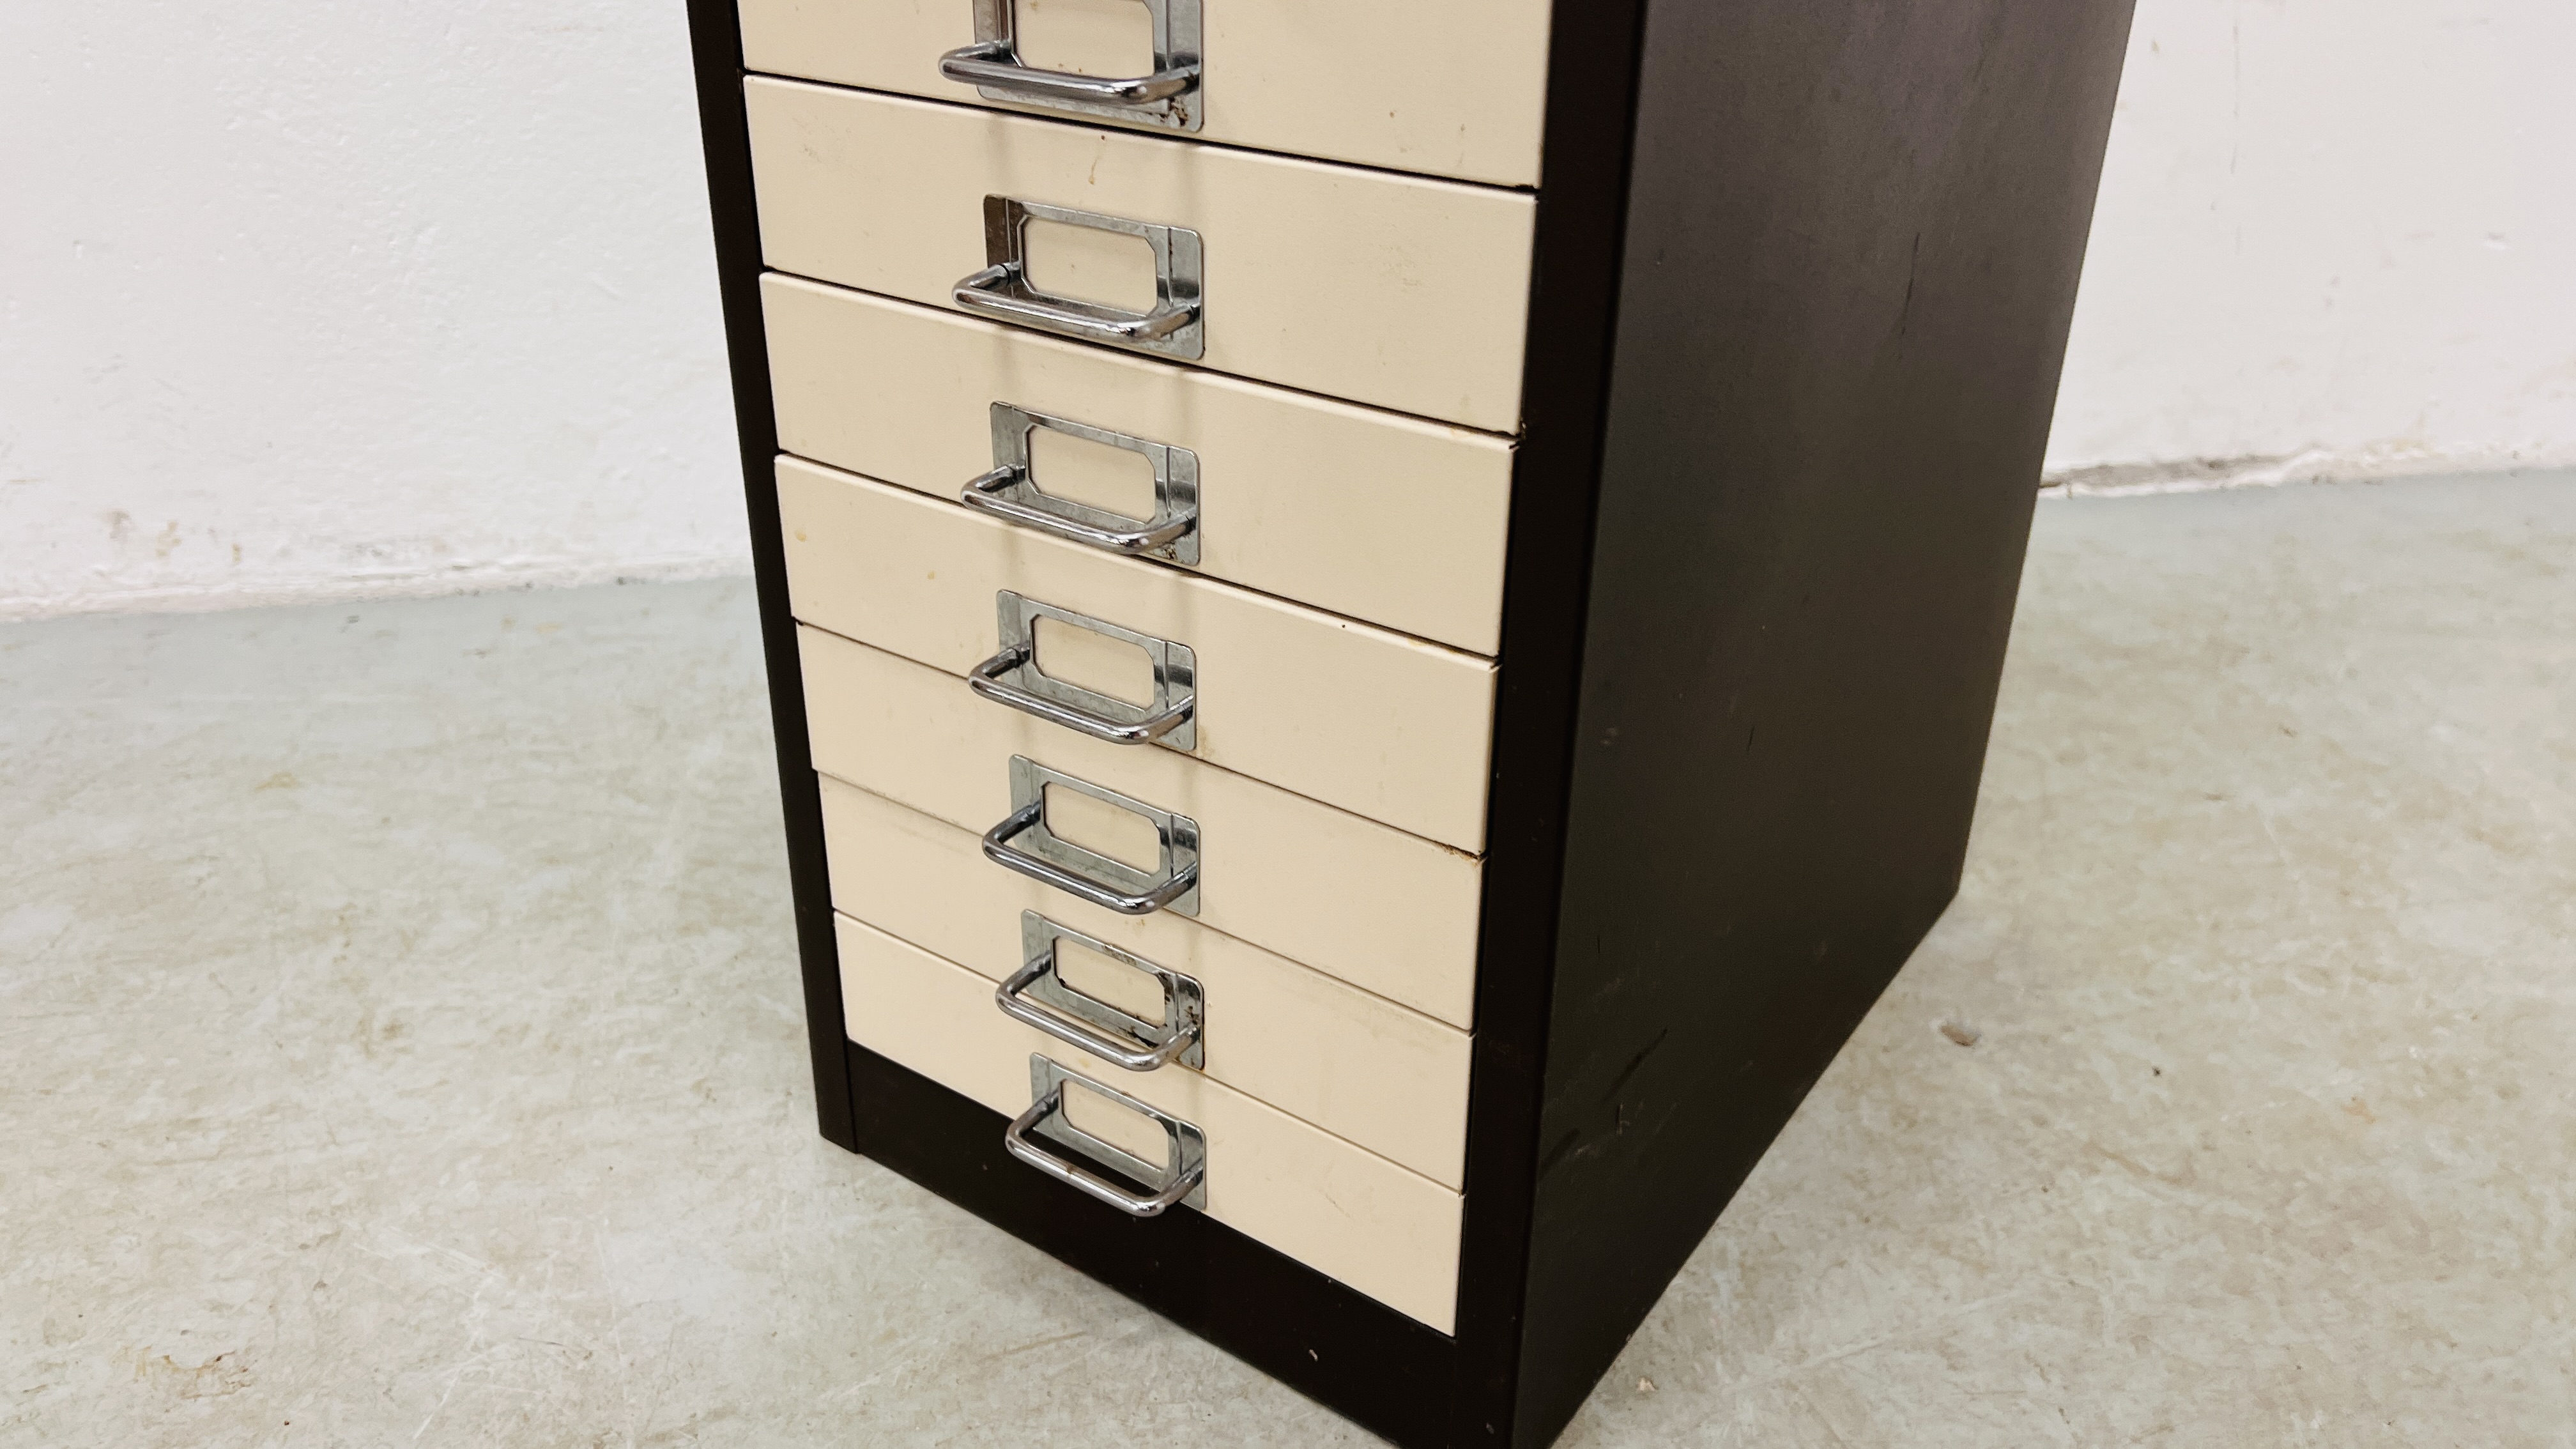 A SMALL STEEL TEN DRAWER FILING CHEST - W 28CM. D 41CM. H 61CM. - Image 5 of 5